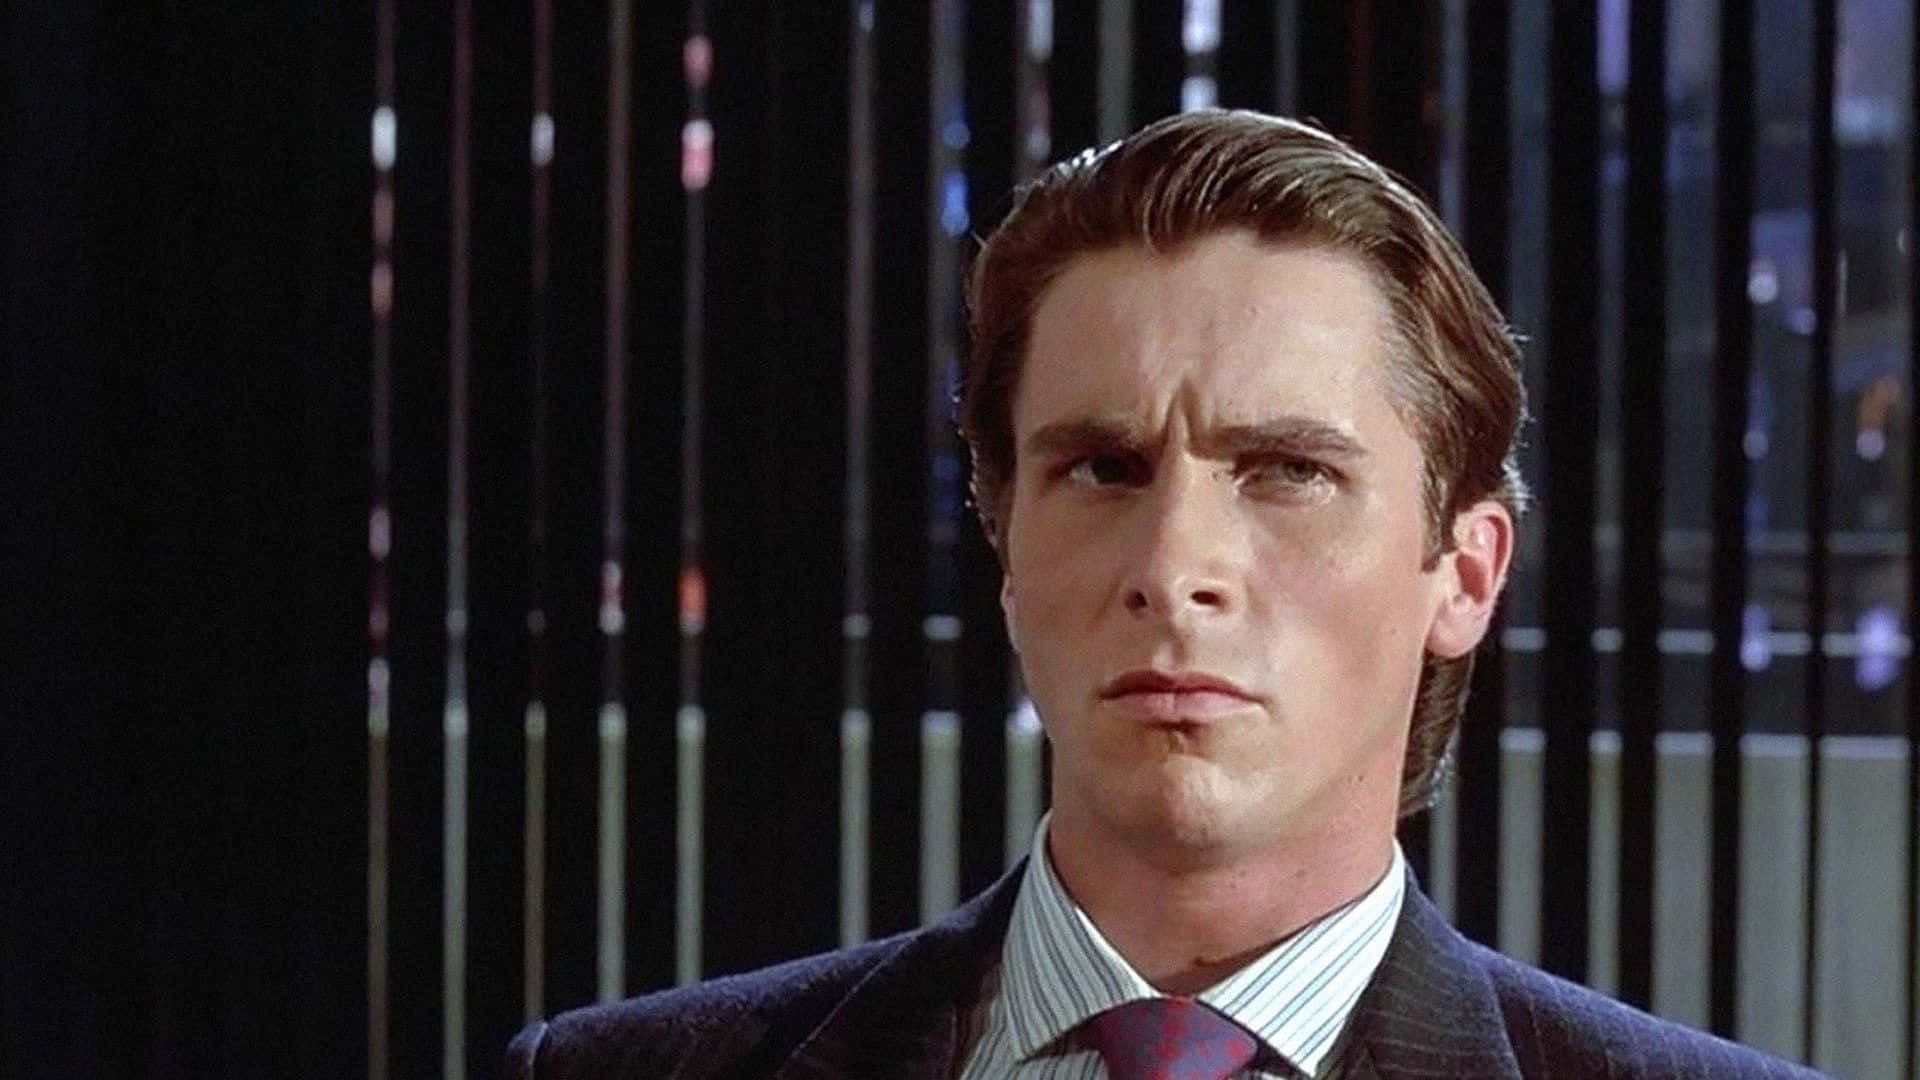 Download Patrick Bateman Portrayed By Christian Bale In The Cult Classic Movie American Psycho